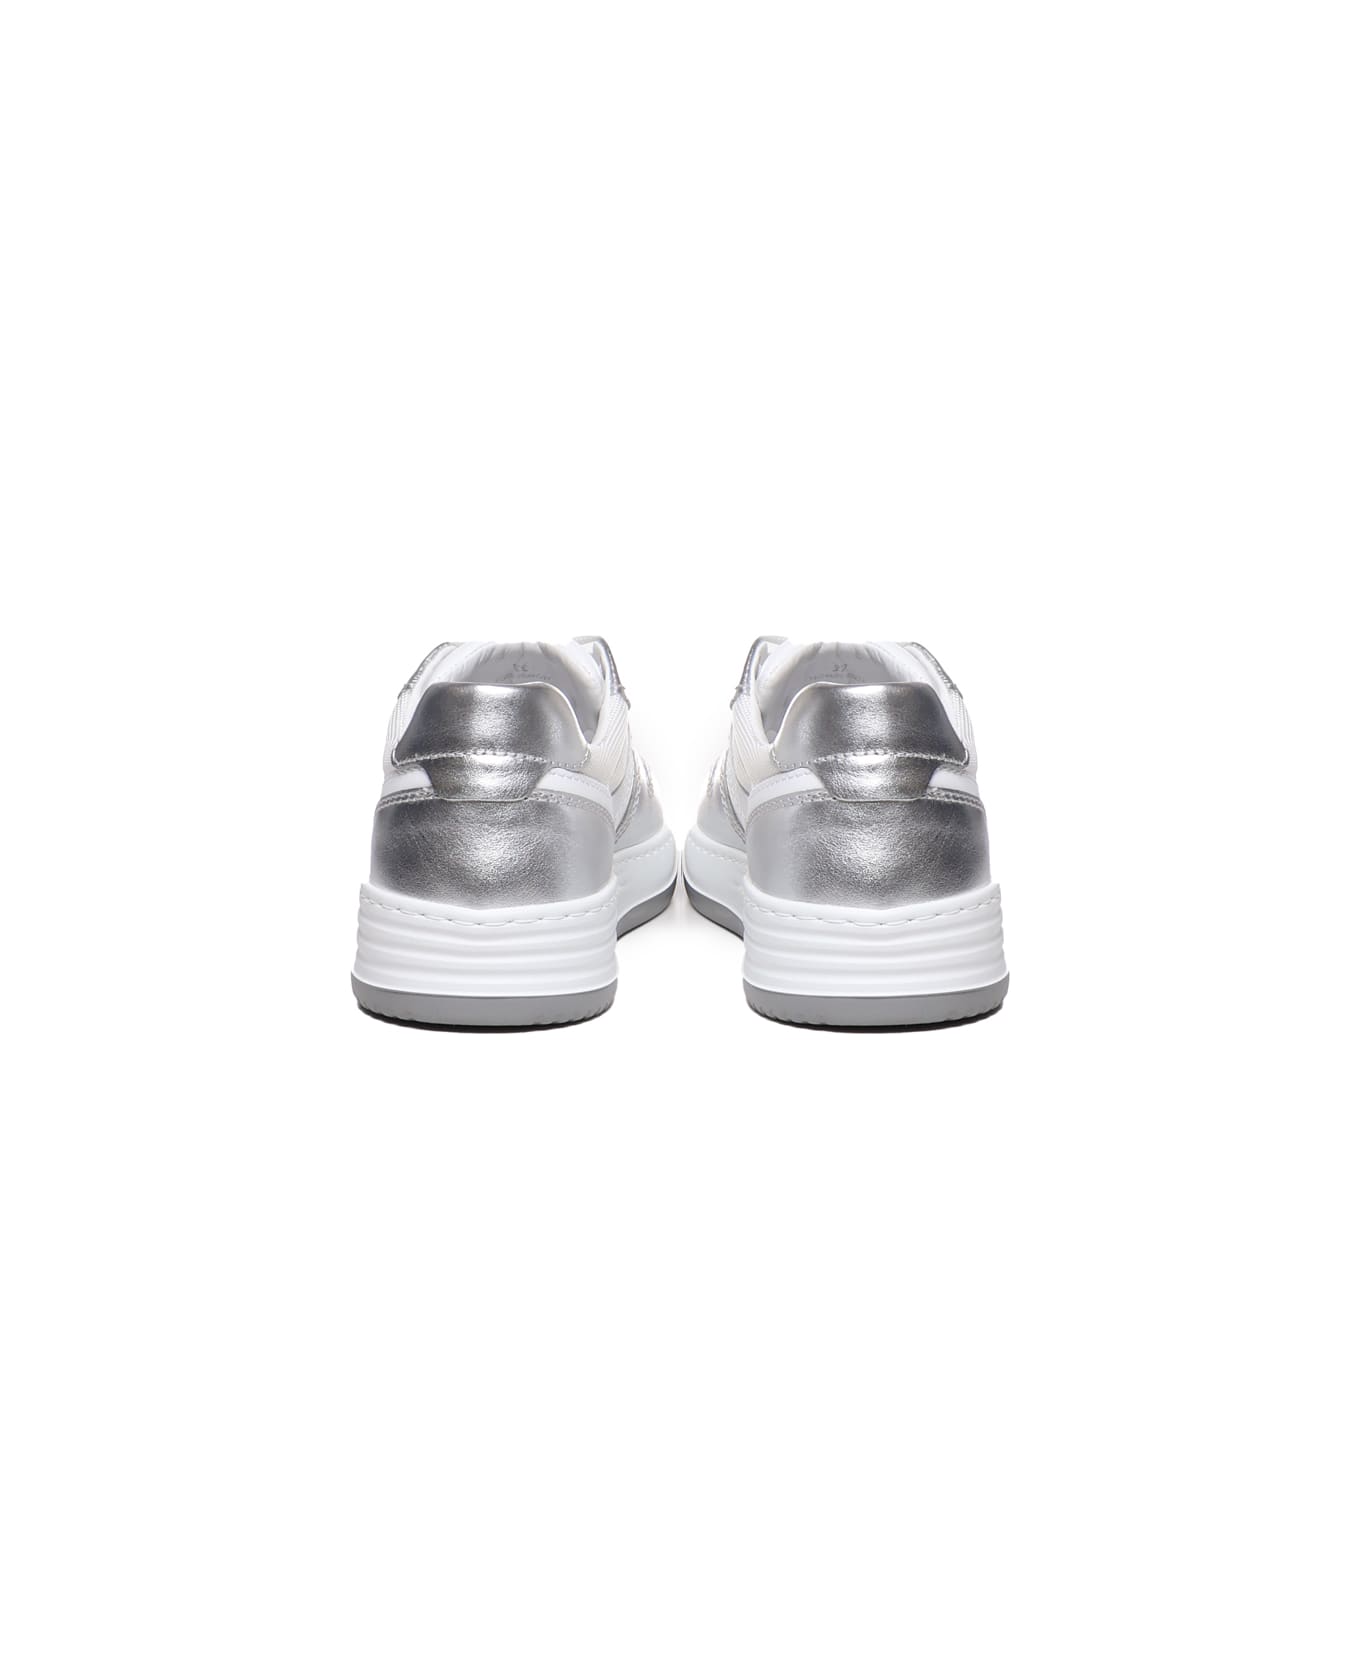 Hogan 630 Sneakers With Metallic Inserts - White, silver